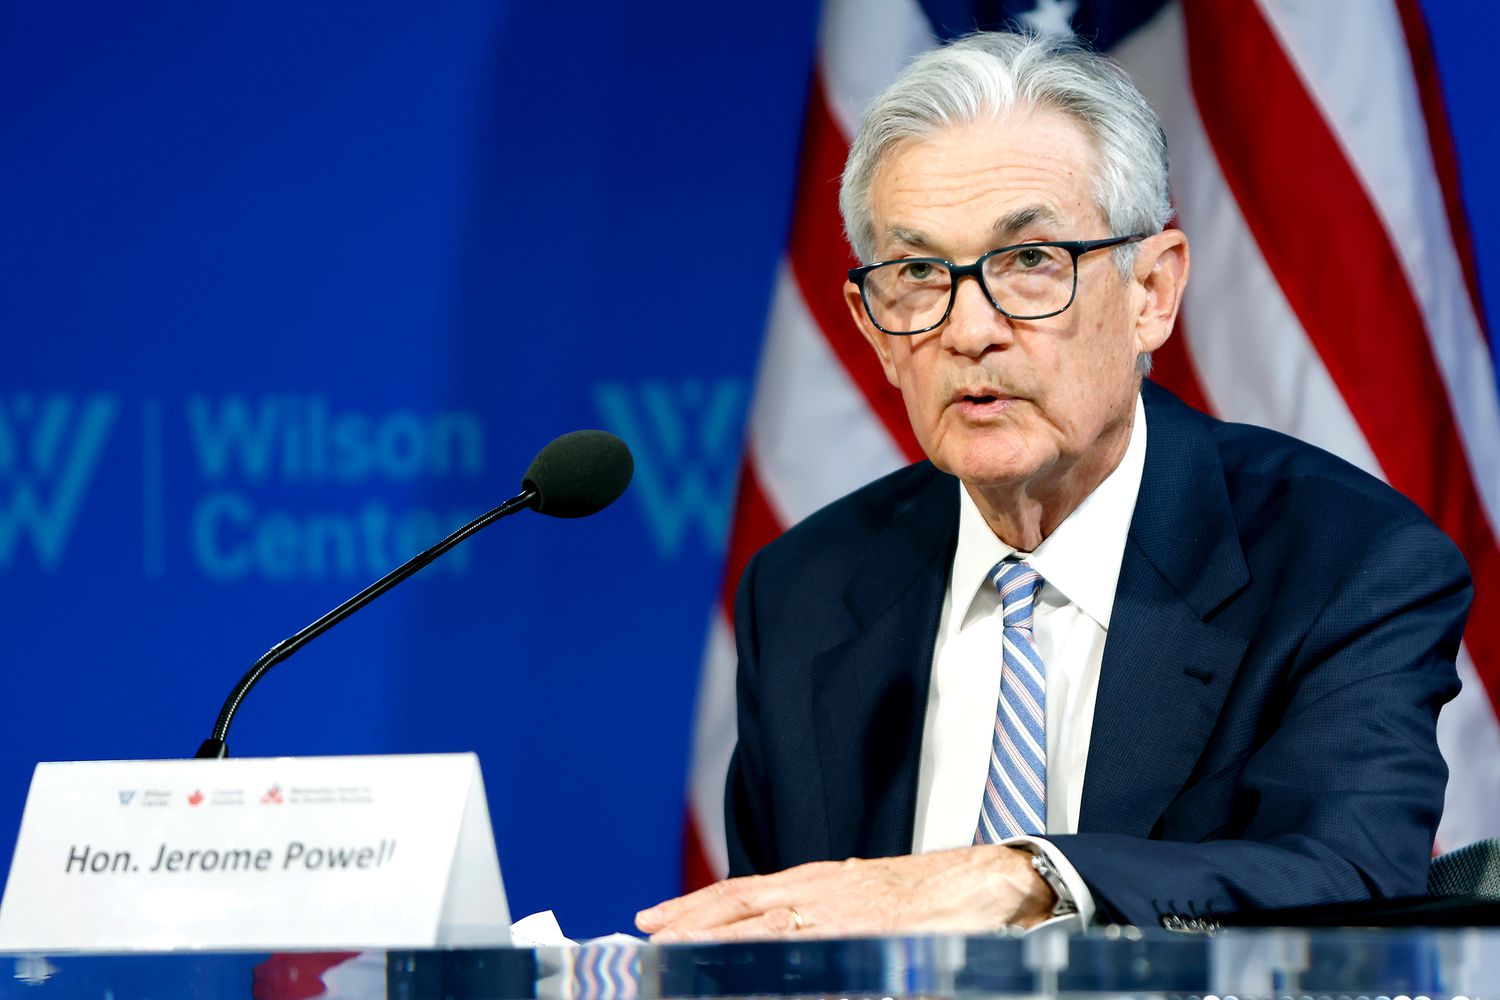 What To Expect From The Federal Reserve’s Interest Rate Policy Meeting Next Week [Video]